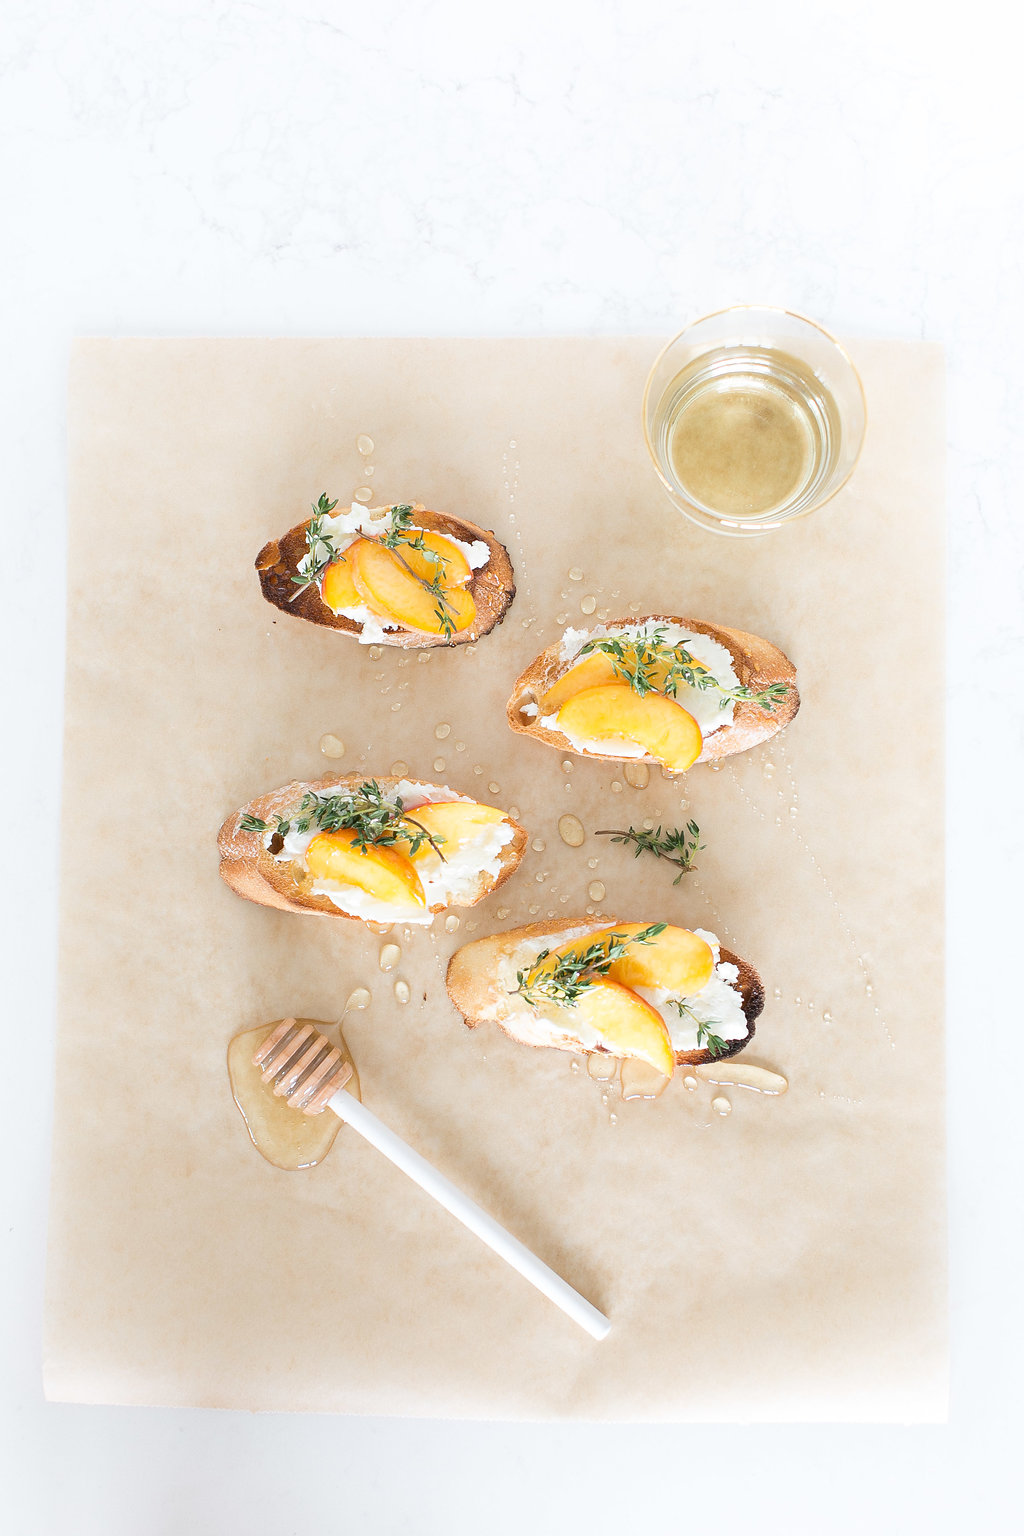 This Peach Chèvre Crostini is summer's perfect appetizer.